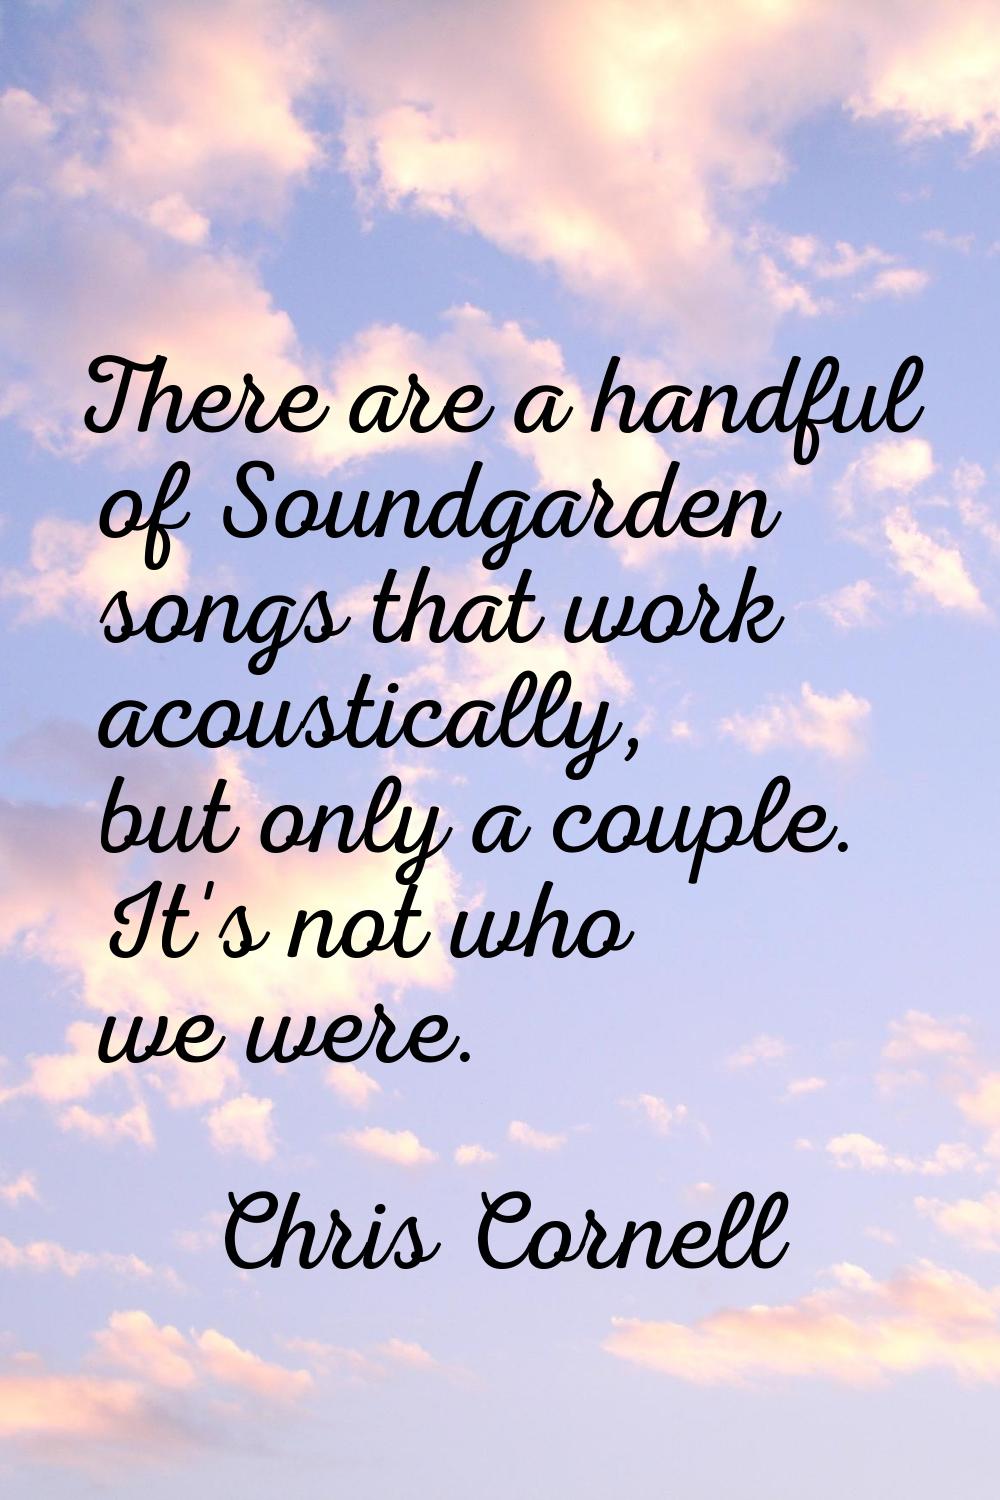 There are a handful of Soundgarden songs that work acoustically, but only a couple. It's not who we